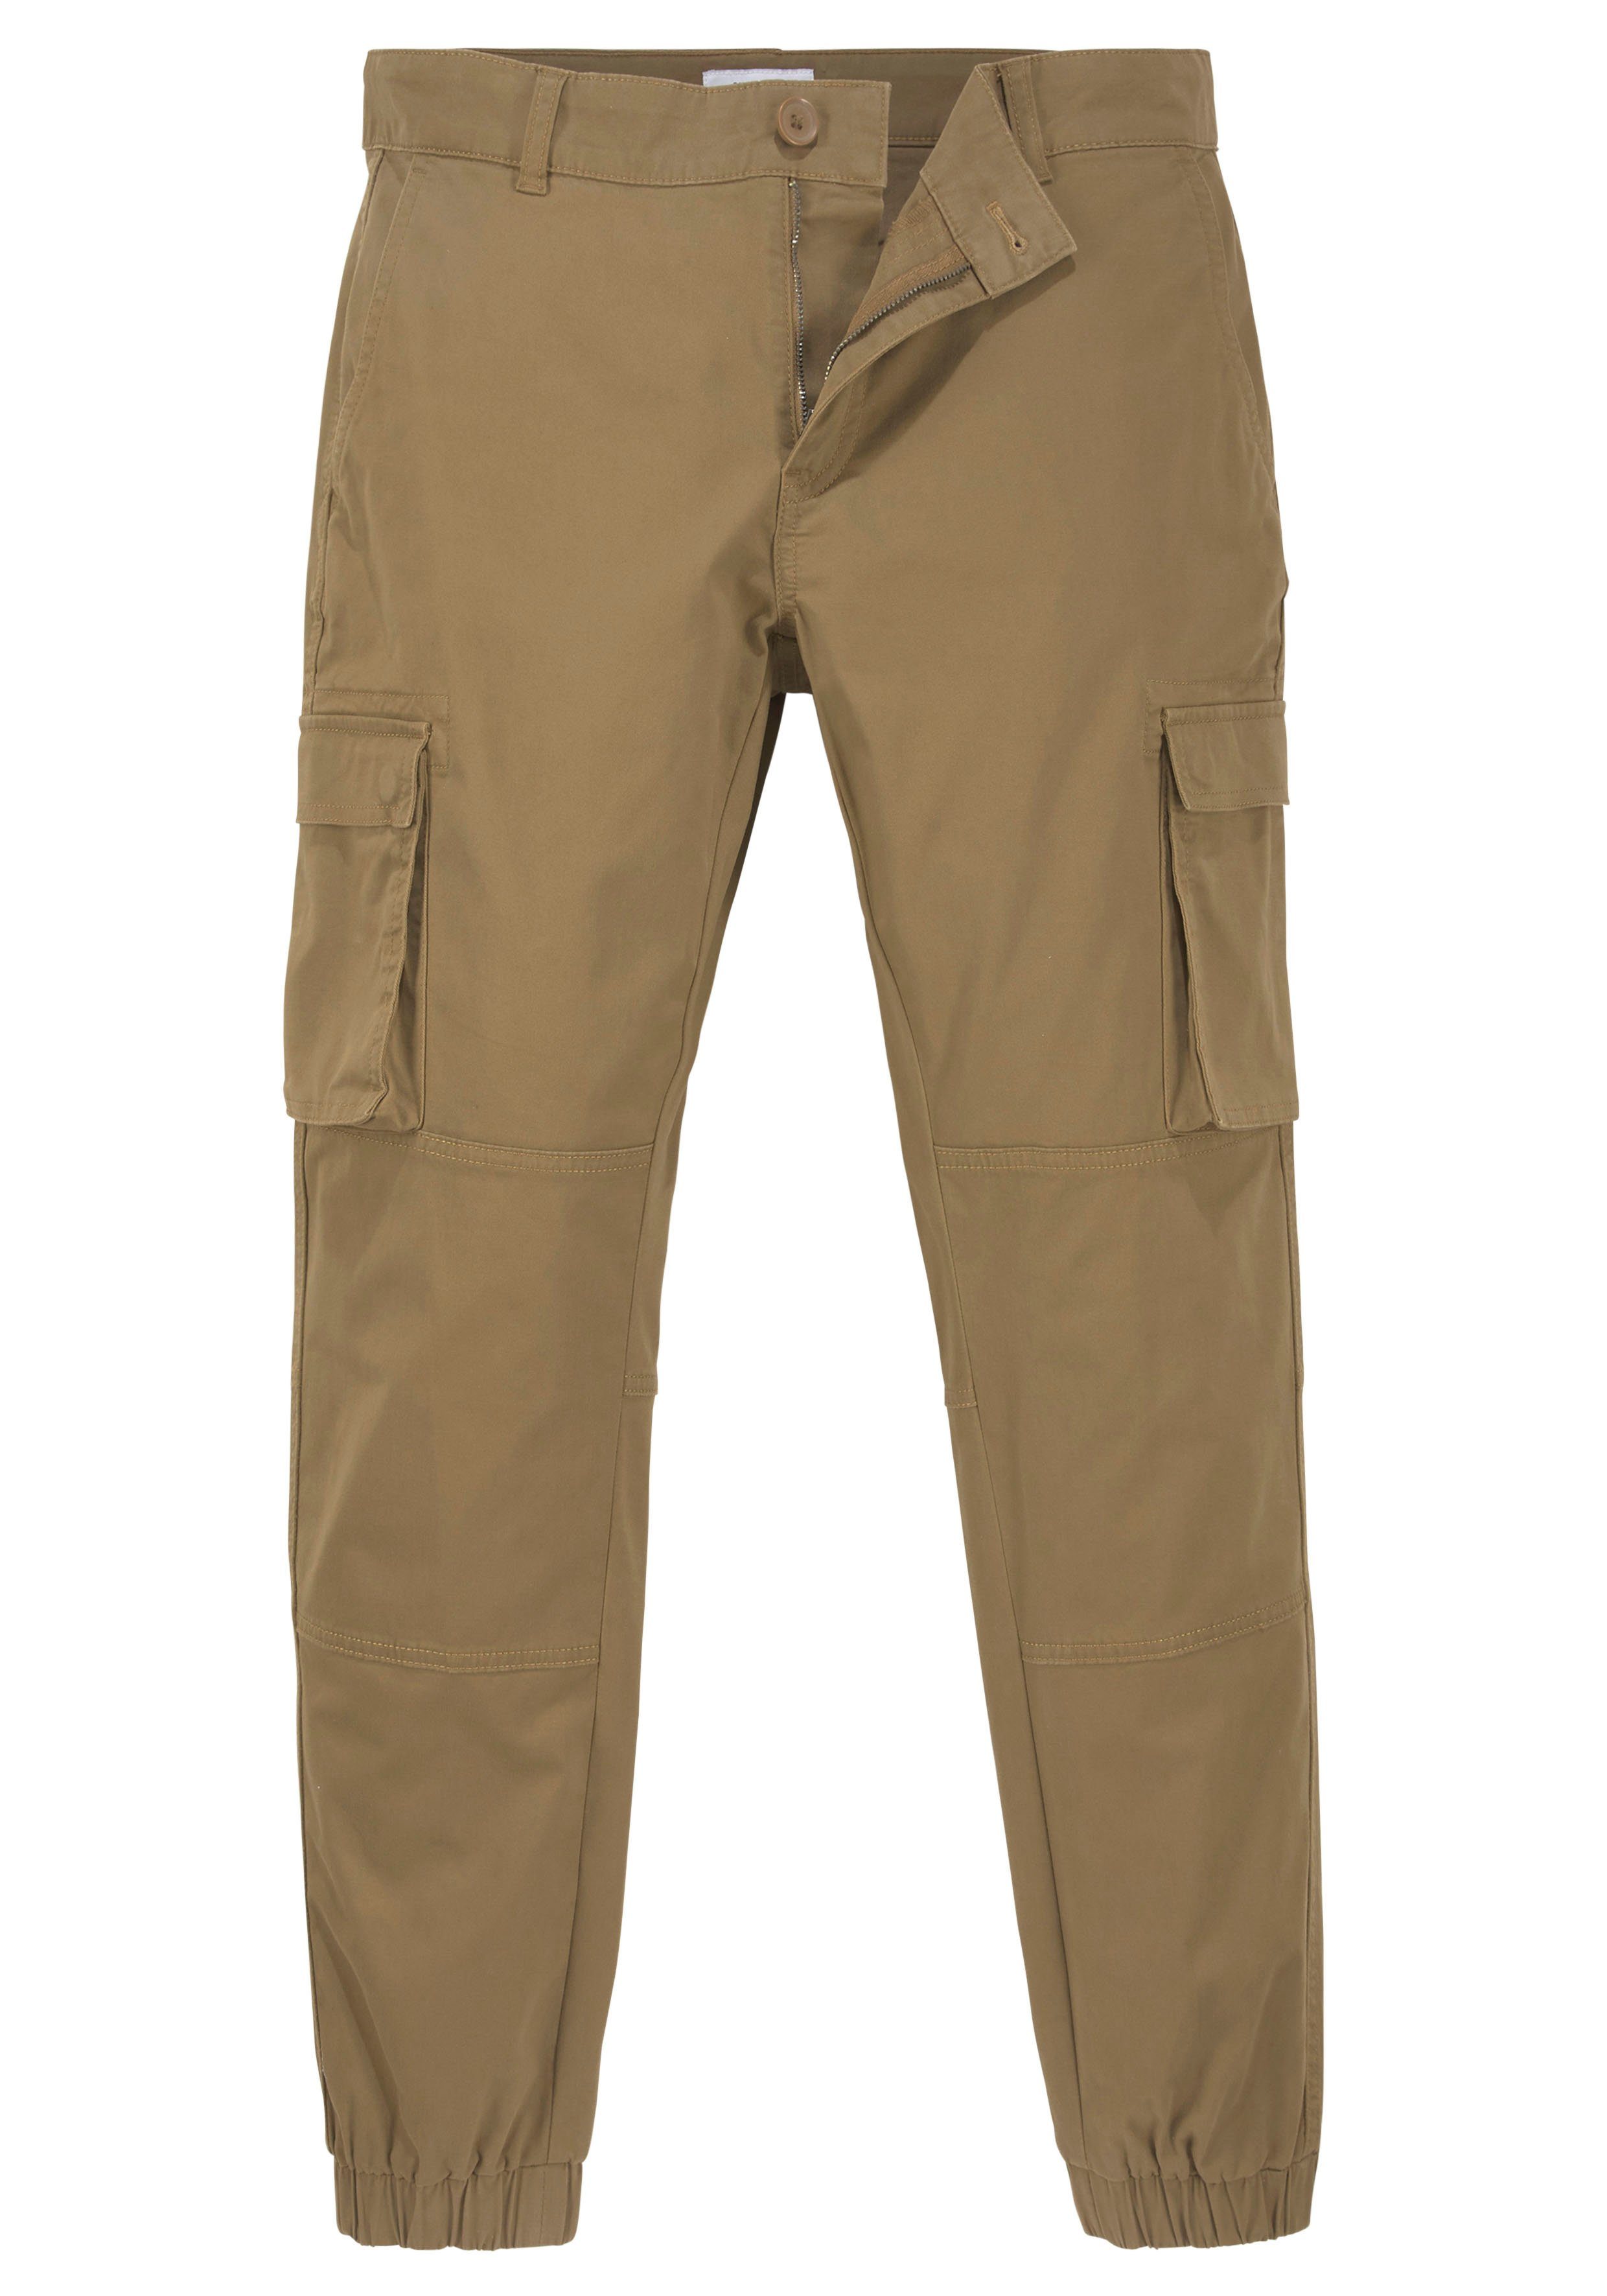 ONLY & SONS Cargohose STAGE CAM CARGO beige CUFF